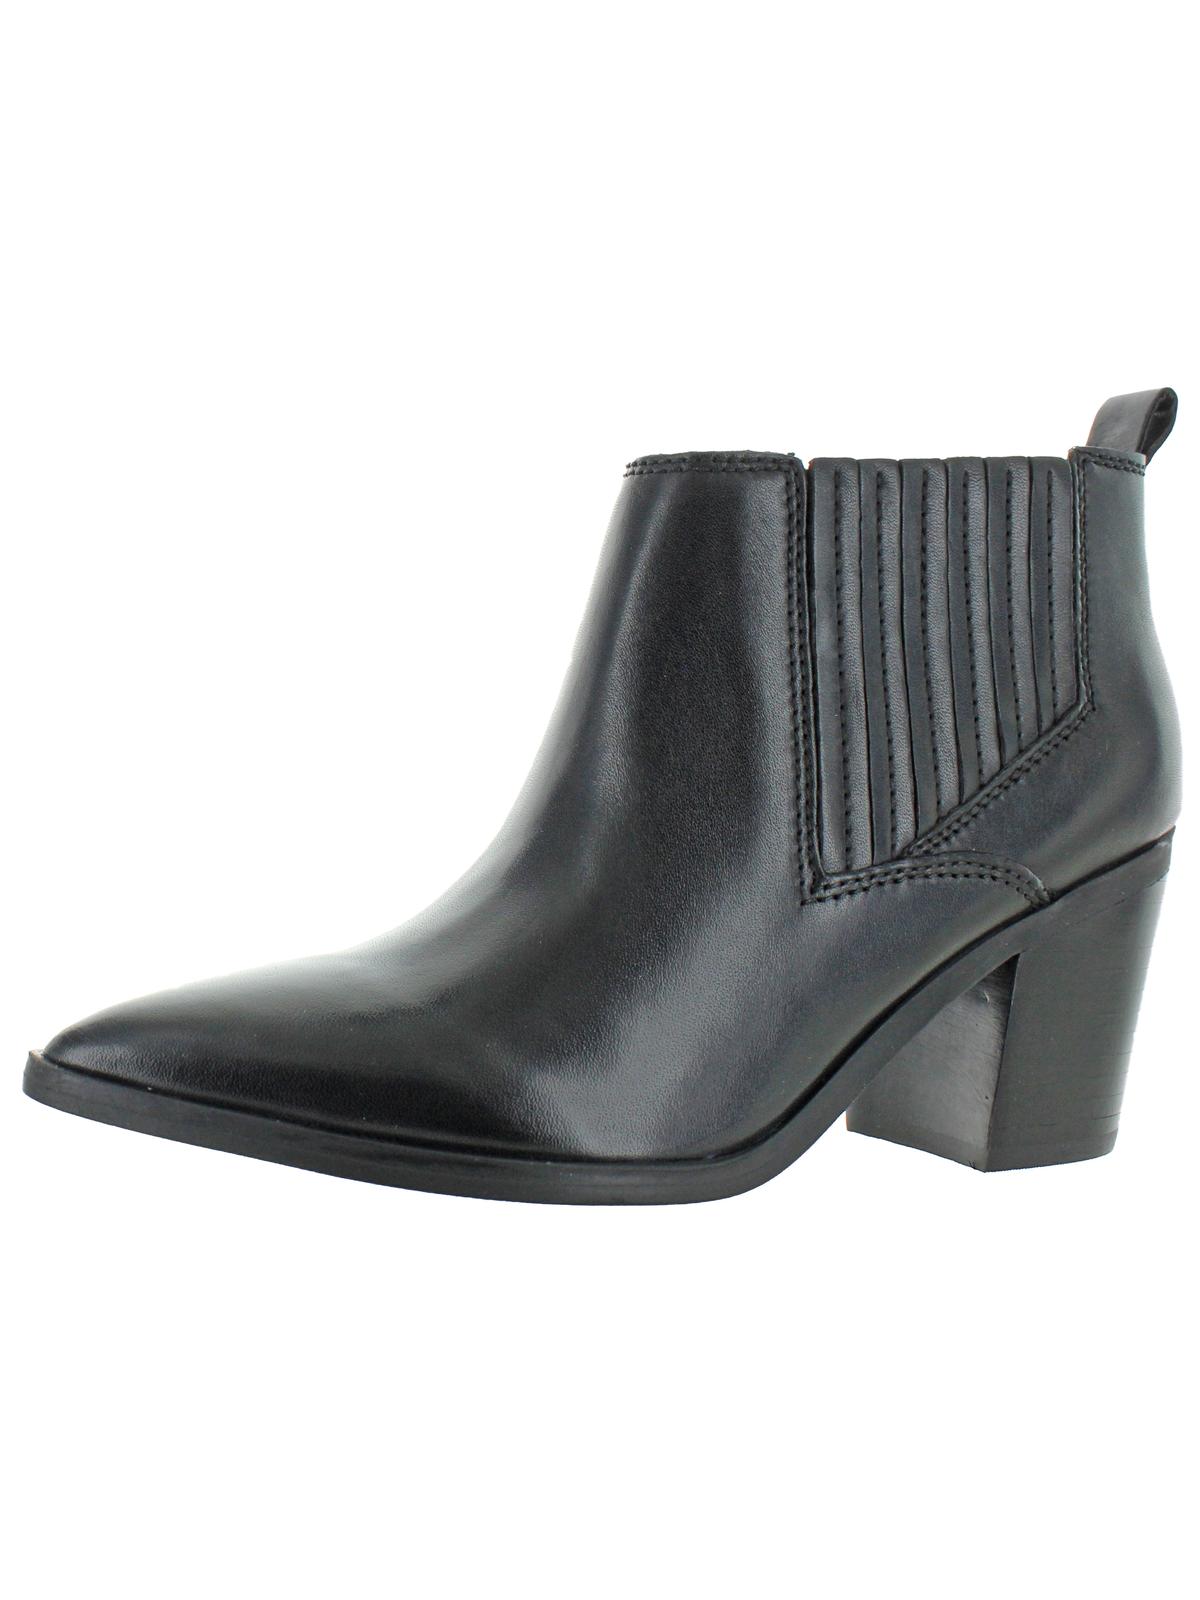 Marc Fisher Womens Rental 2 Faux Leather Ankle Booties - Walmart.com